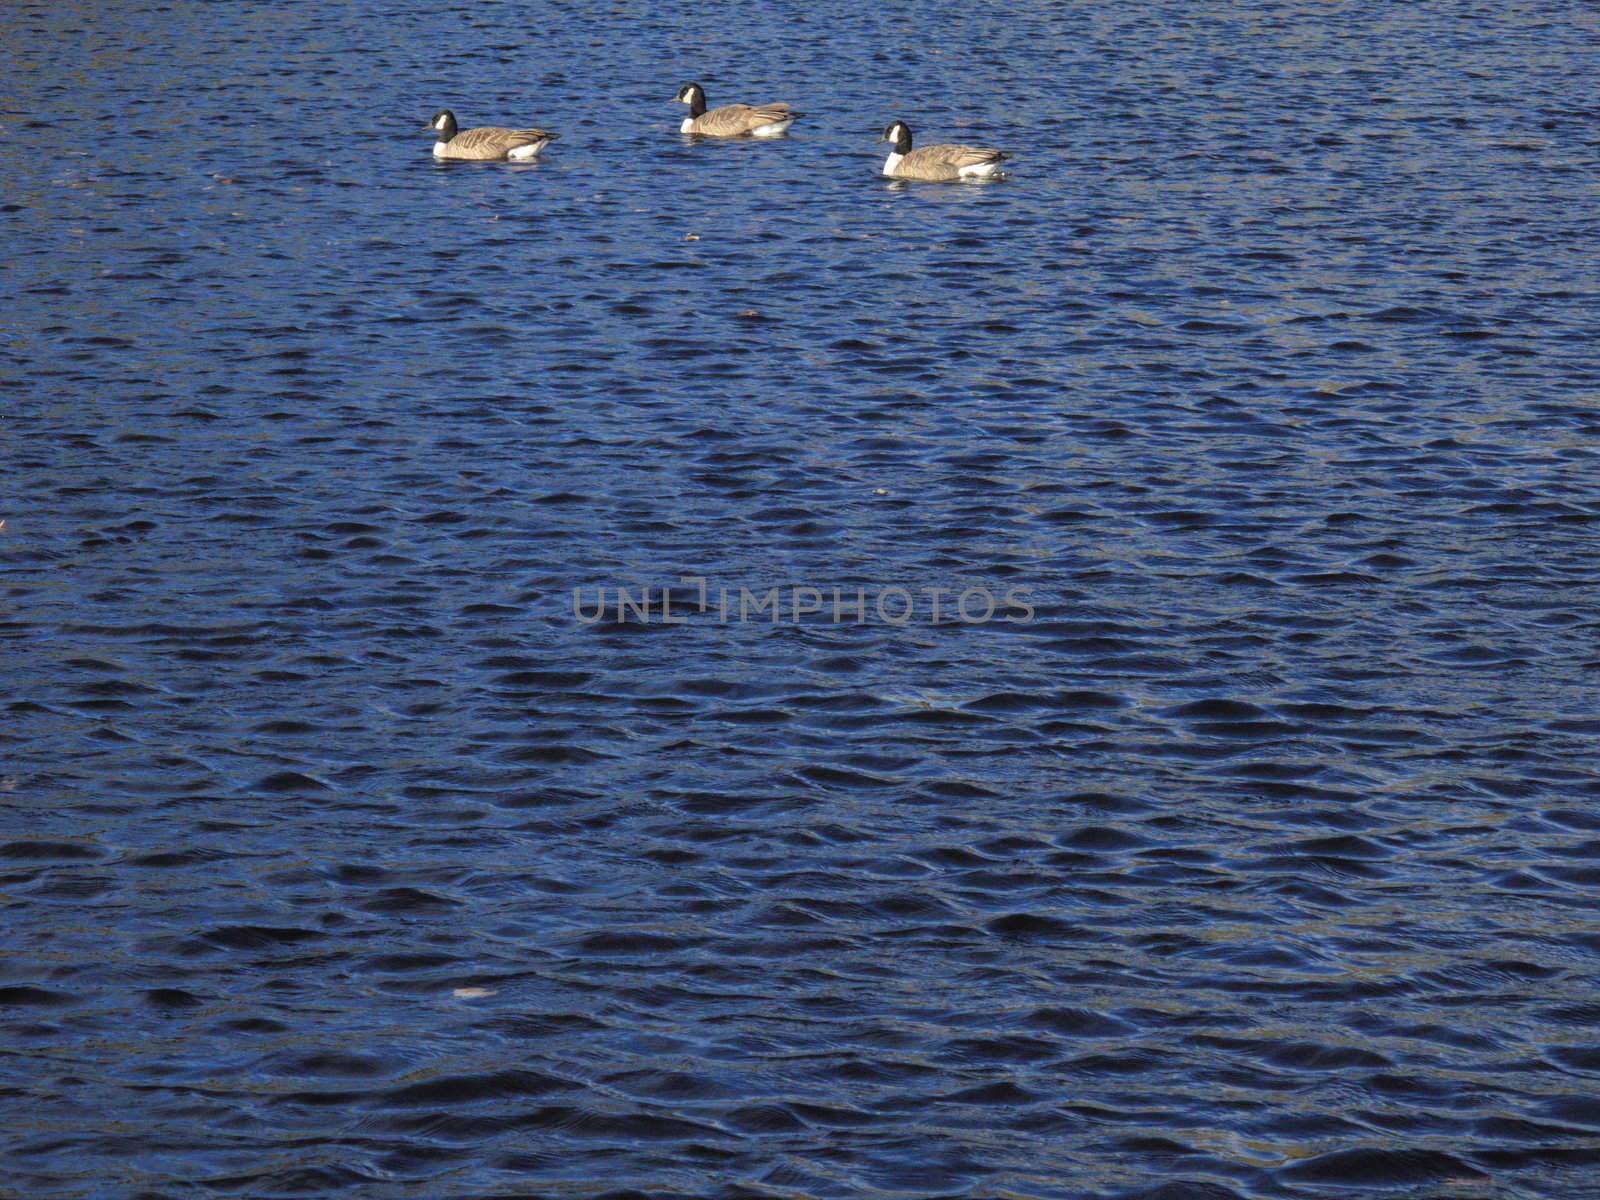 Three Geese on a Pond by Ffooter